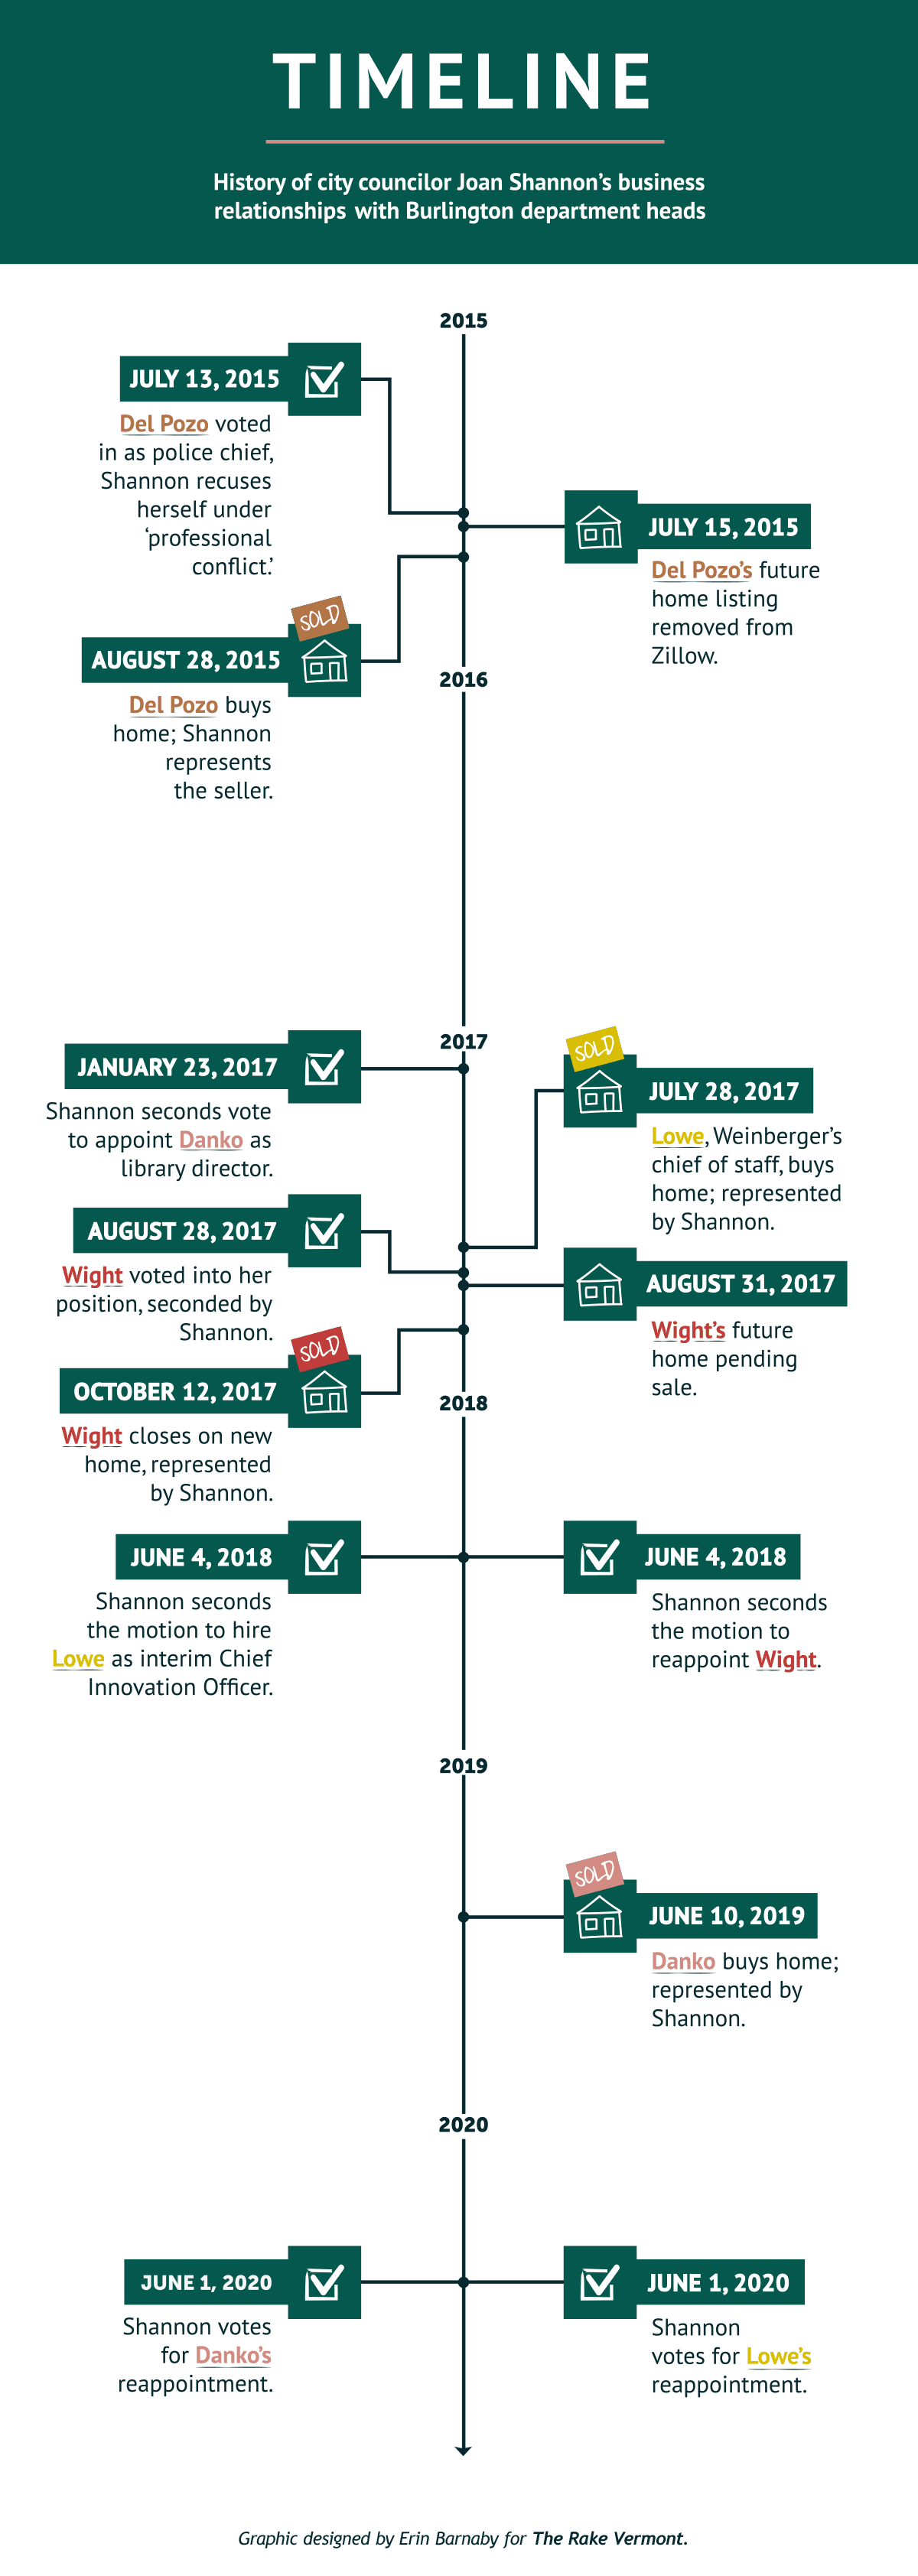 Timeline: History of city councilor Joan Shannon's business relationships with Burlington department heads